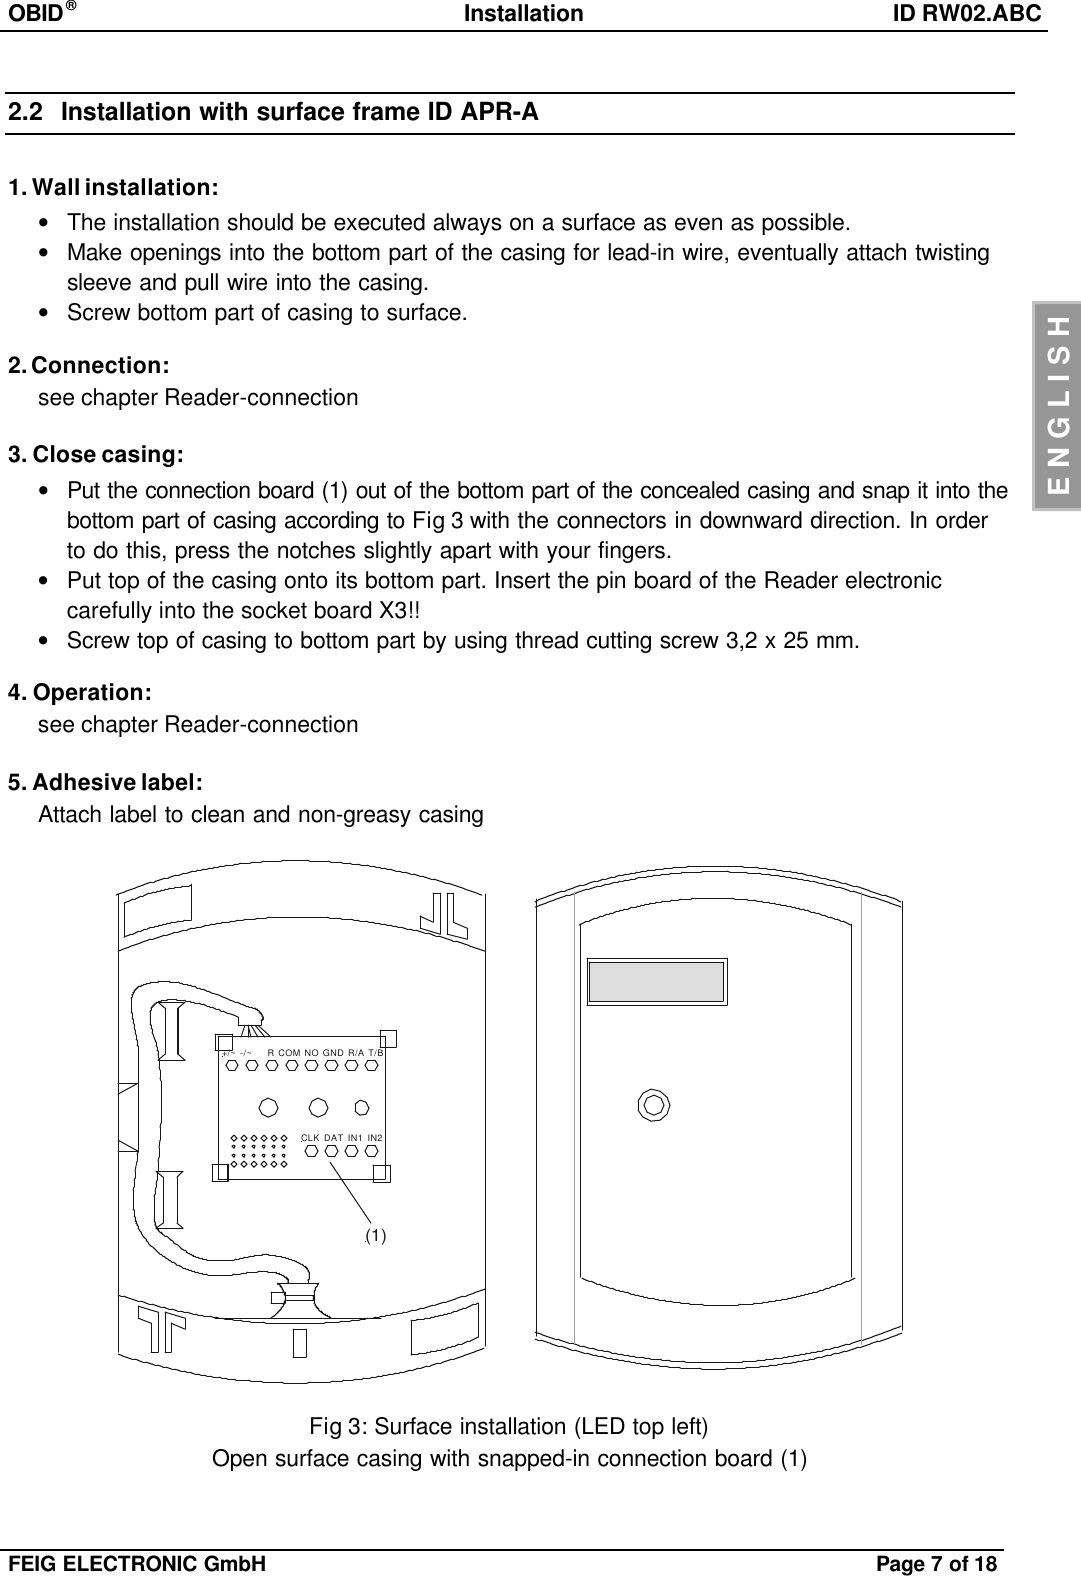 OBID®Installation ID RW02.ABCFEIG ELECTRONIC GmbH Page 7of 18ENGLISH2.2 Installation with surface frame ID APR-A1. Wall installation:•The installation should be executed always on a surface as even as possible.•Make openings into the bottom part of the casing for lead-in wire, eventually attach twistingsleeve and pull wire into the casing.•Screw bottom part of casing to surface.2. Connection:see chapter Reader-connection3. Close casing:•Put the connection board (1) out of the bottom part of the concealed casing and snap it into thebottom part of casing according to Fig 3with the connectors in downward direction. In orderto do this, press the notches slightly apart with your fingers.•Put top of the casing onto its bottom part. Insert the pin board of the Reader electroniccarefully into the socket board X3!!•Screw top of casing to bottom part by using thread cutting screw 3,2 x 25 mm.4. Operation:see chapter Reader-connection5. Adhesive label:Attach label to clean and non-greasy casing+/~ -/~    R COM NO GND R/A T/BCLK DAT IN1 IN2(1)Fig 3: Surface installation (LED top left)Open surface casing with snapped-in connection board (1)